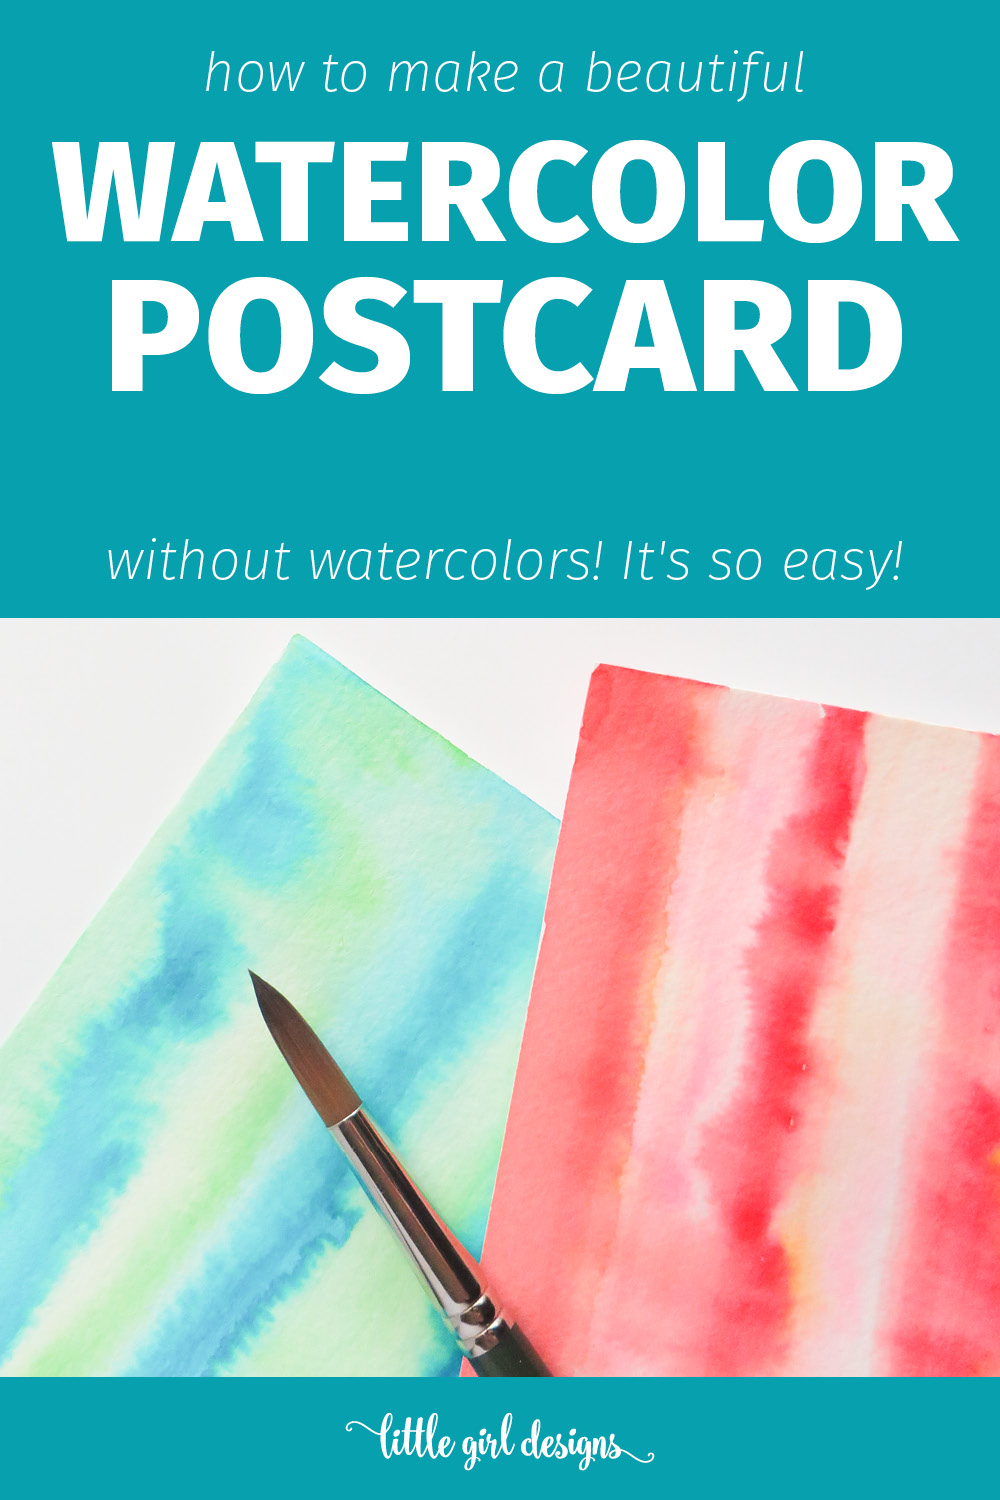 How to Make a Watercolor Postcard . . . Without Watercolors! Oh my goodness, I didn't realize you could do this! This method is so simple I taught it to my 5 and 7-year old nieces and they had a hey-day making lovely watercolor-looking pieces. It's so much fun! Also is a great idea for art journaling backgrounds. :) via littlegirldesigns.com